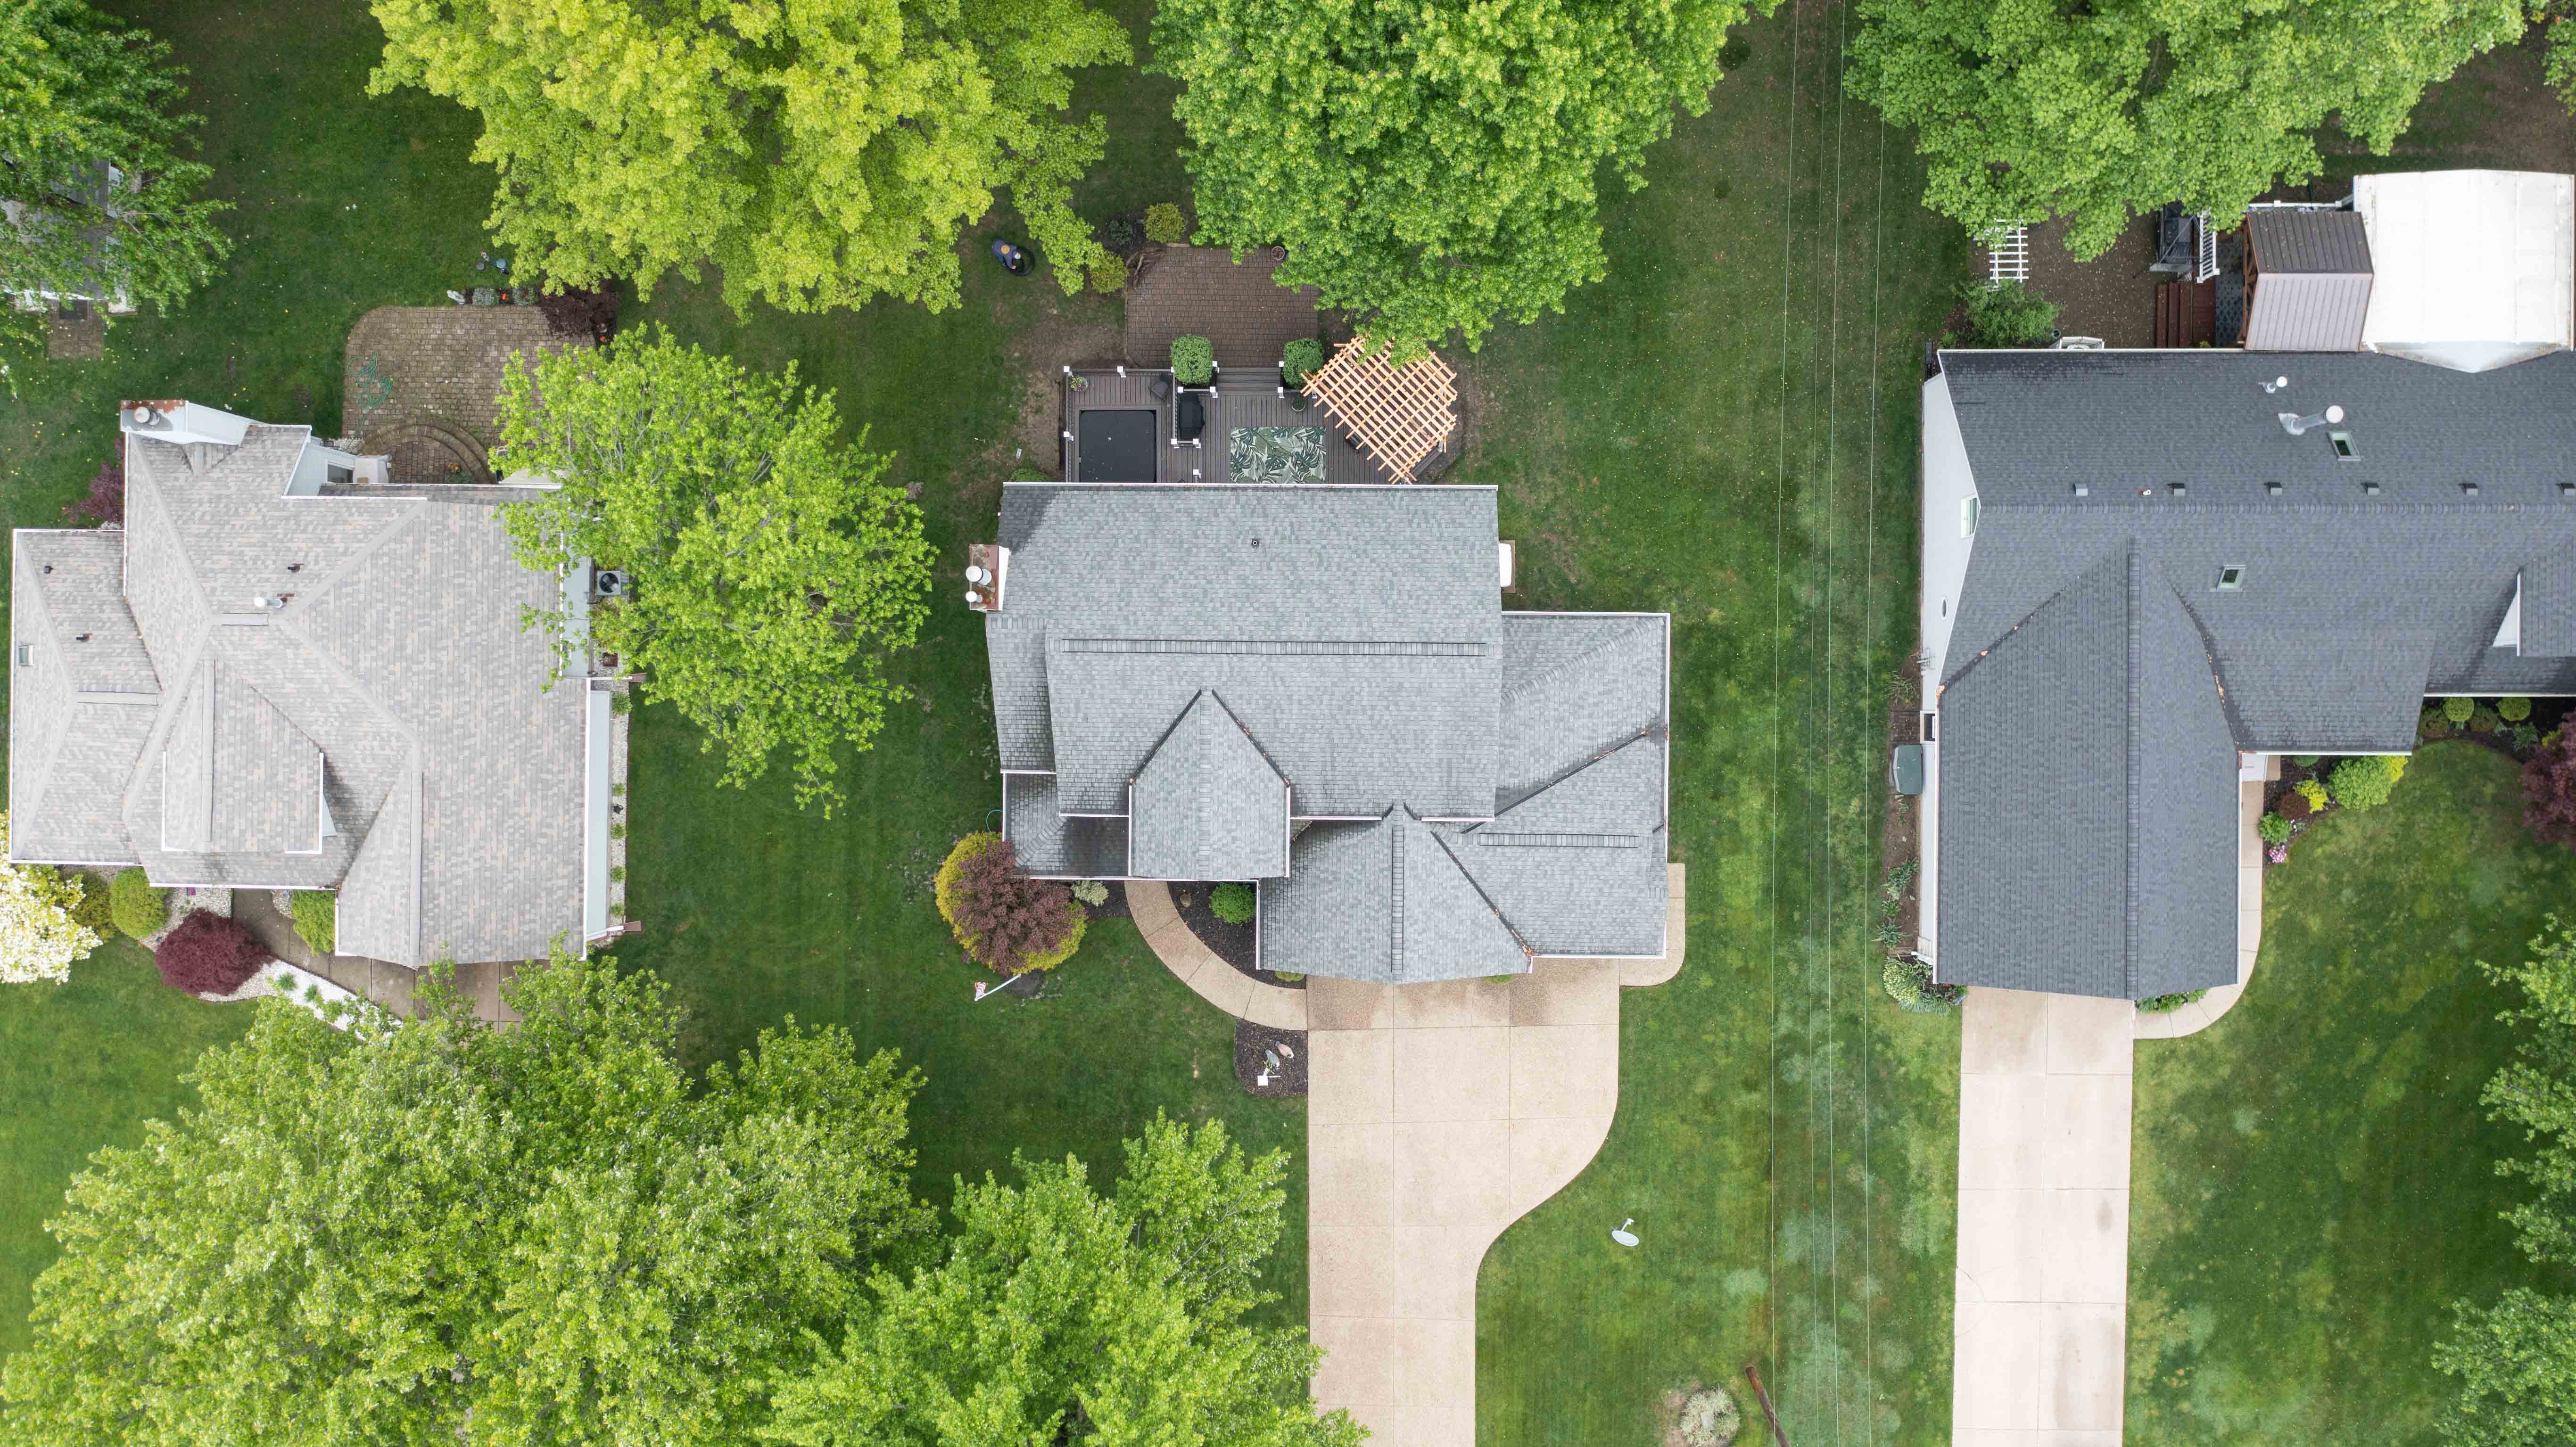 aerial view of home